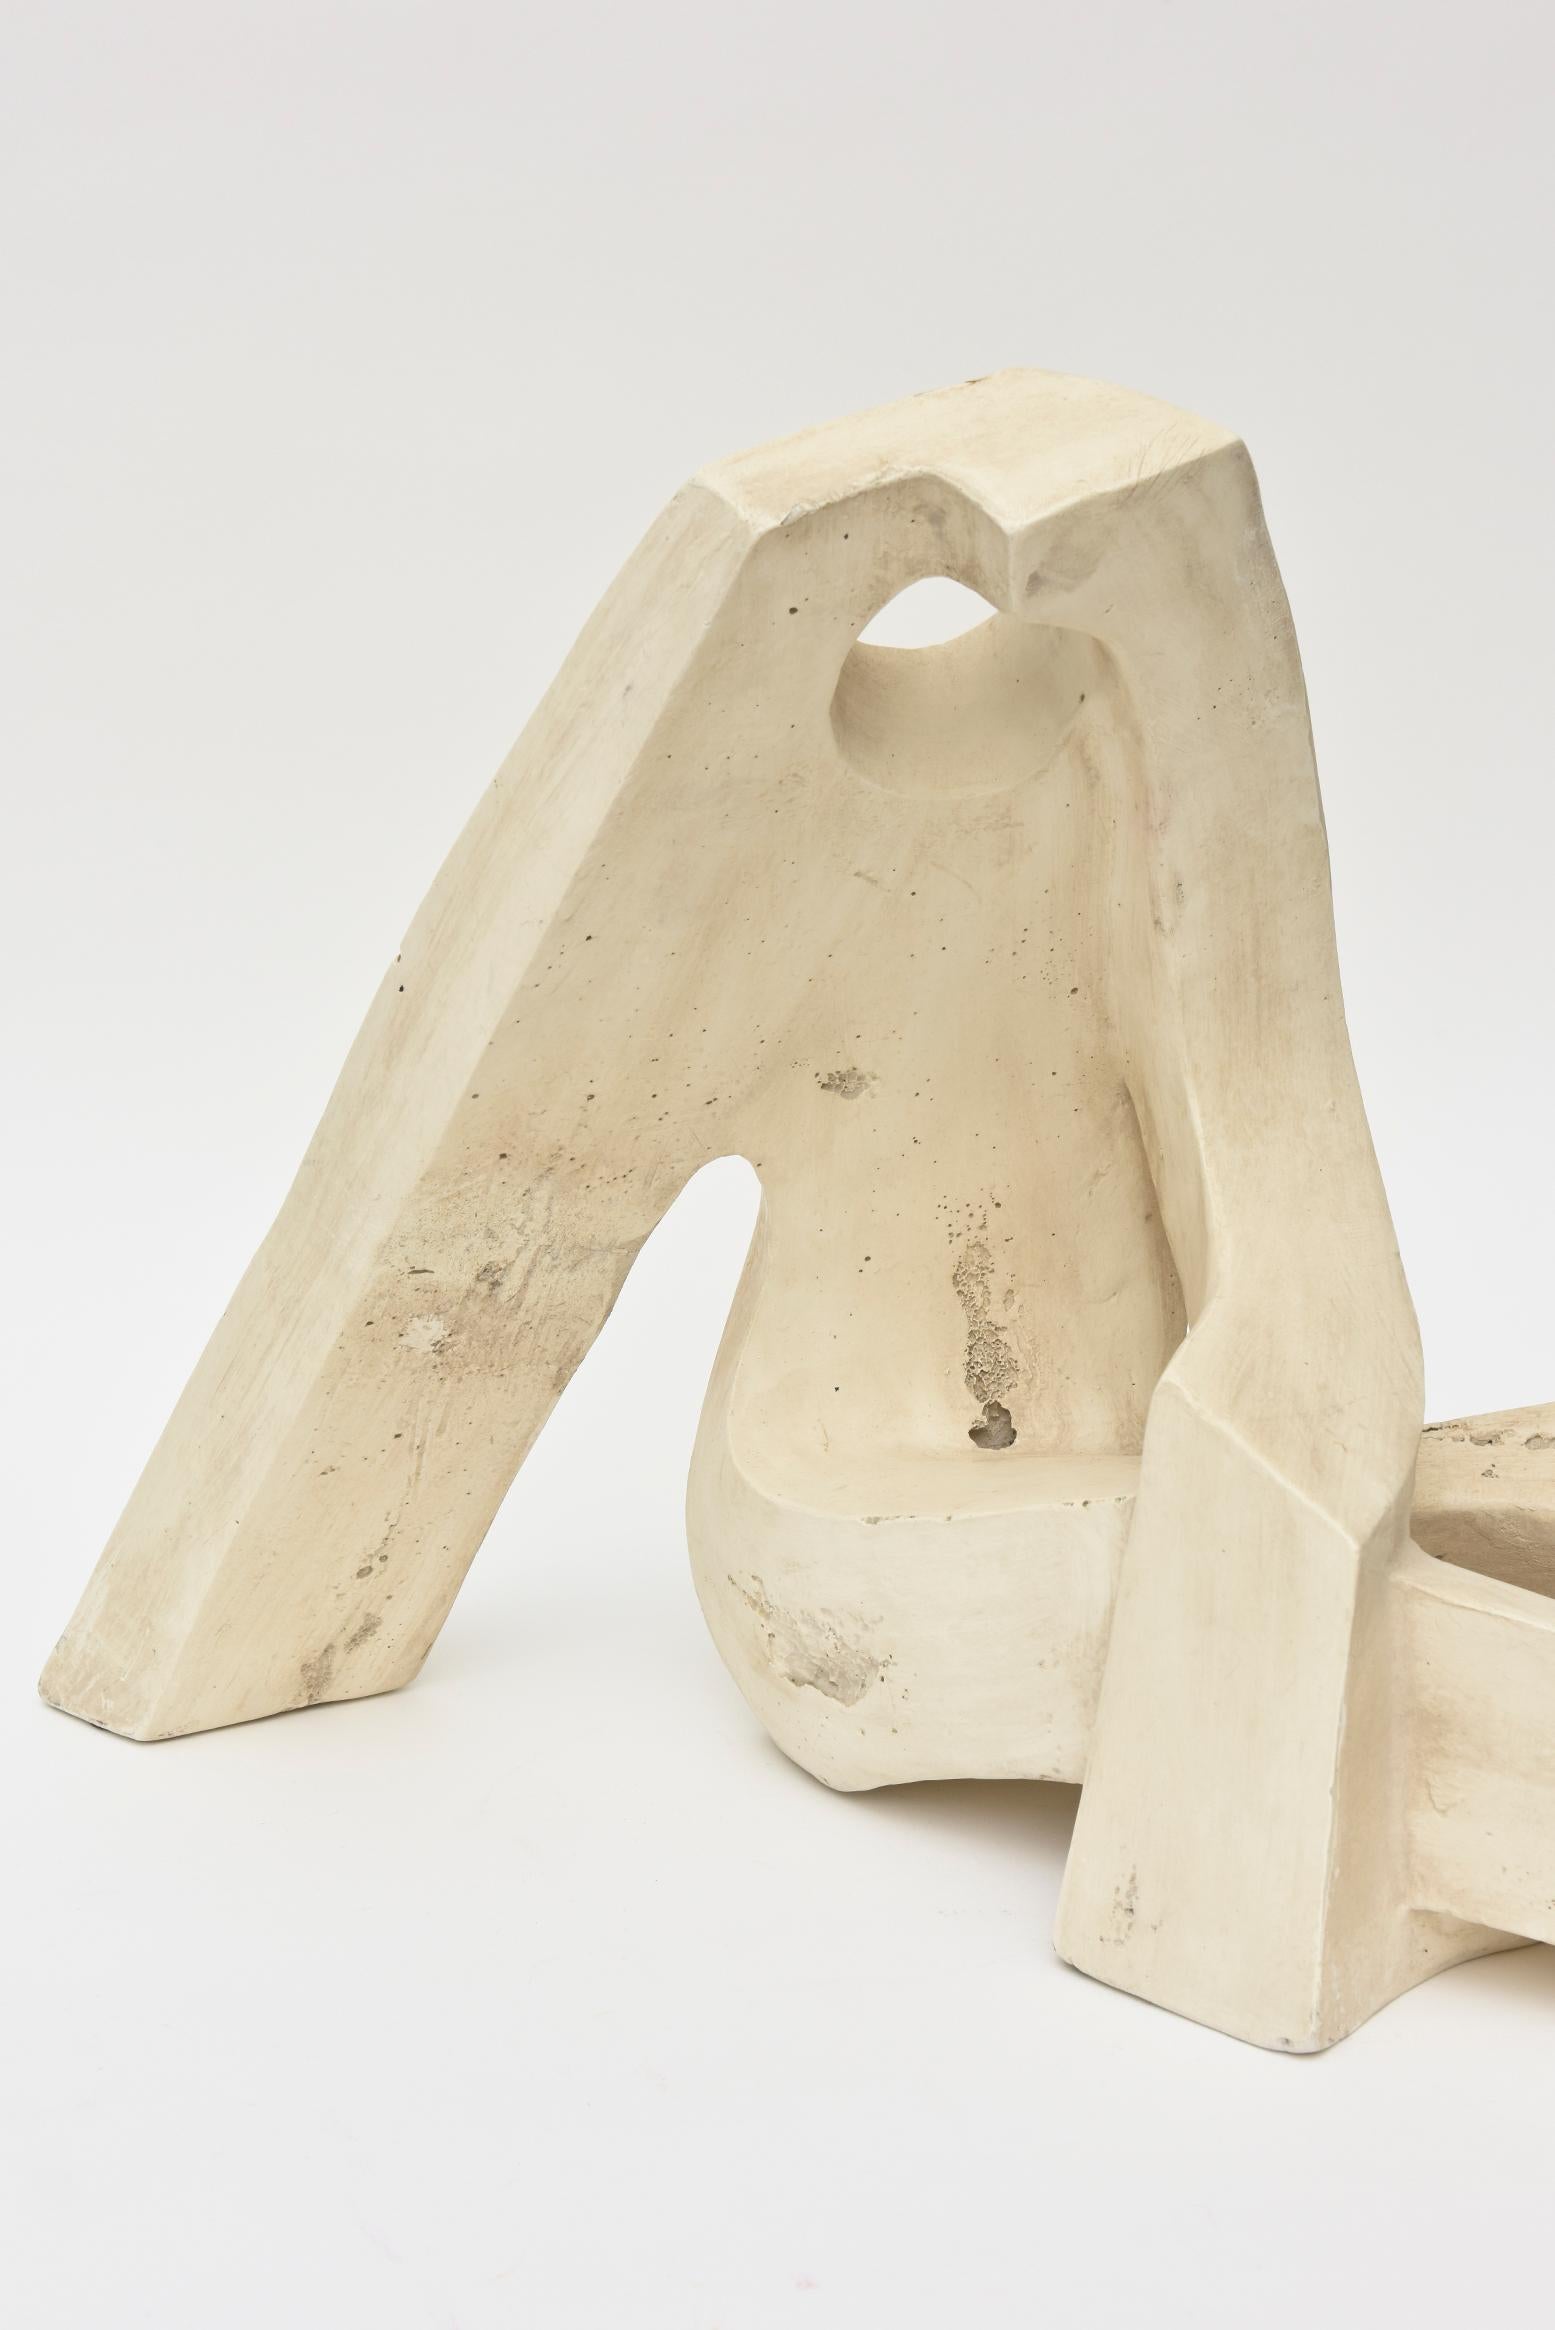 This fabulous seated vintage modernist stone sculpture is abstract. The views change with the different angles. It is of a stone composition but does not have the heavy weight of solid stone. It is not signed but is a real special modernist